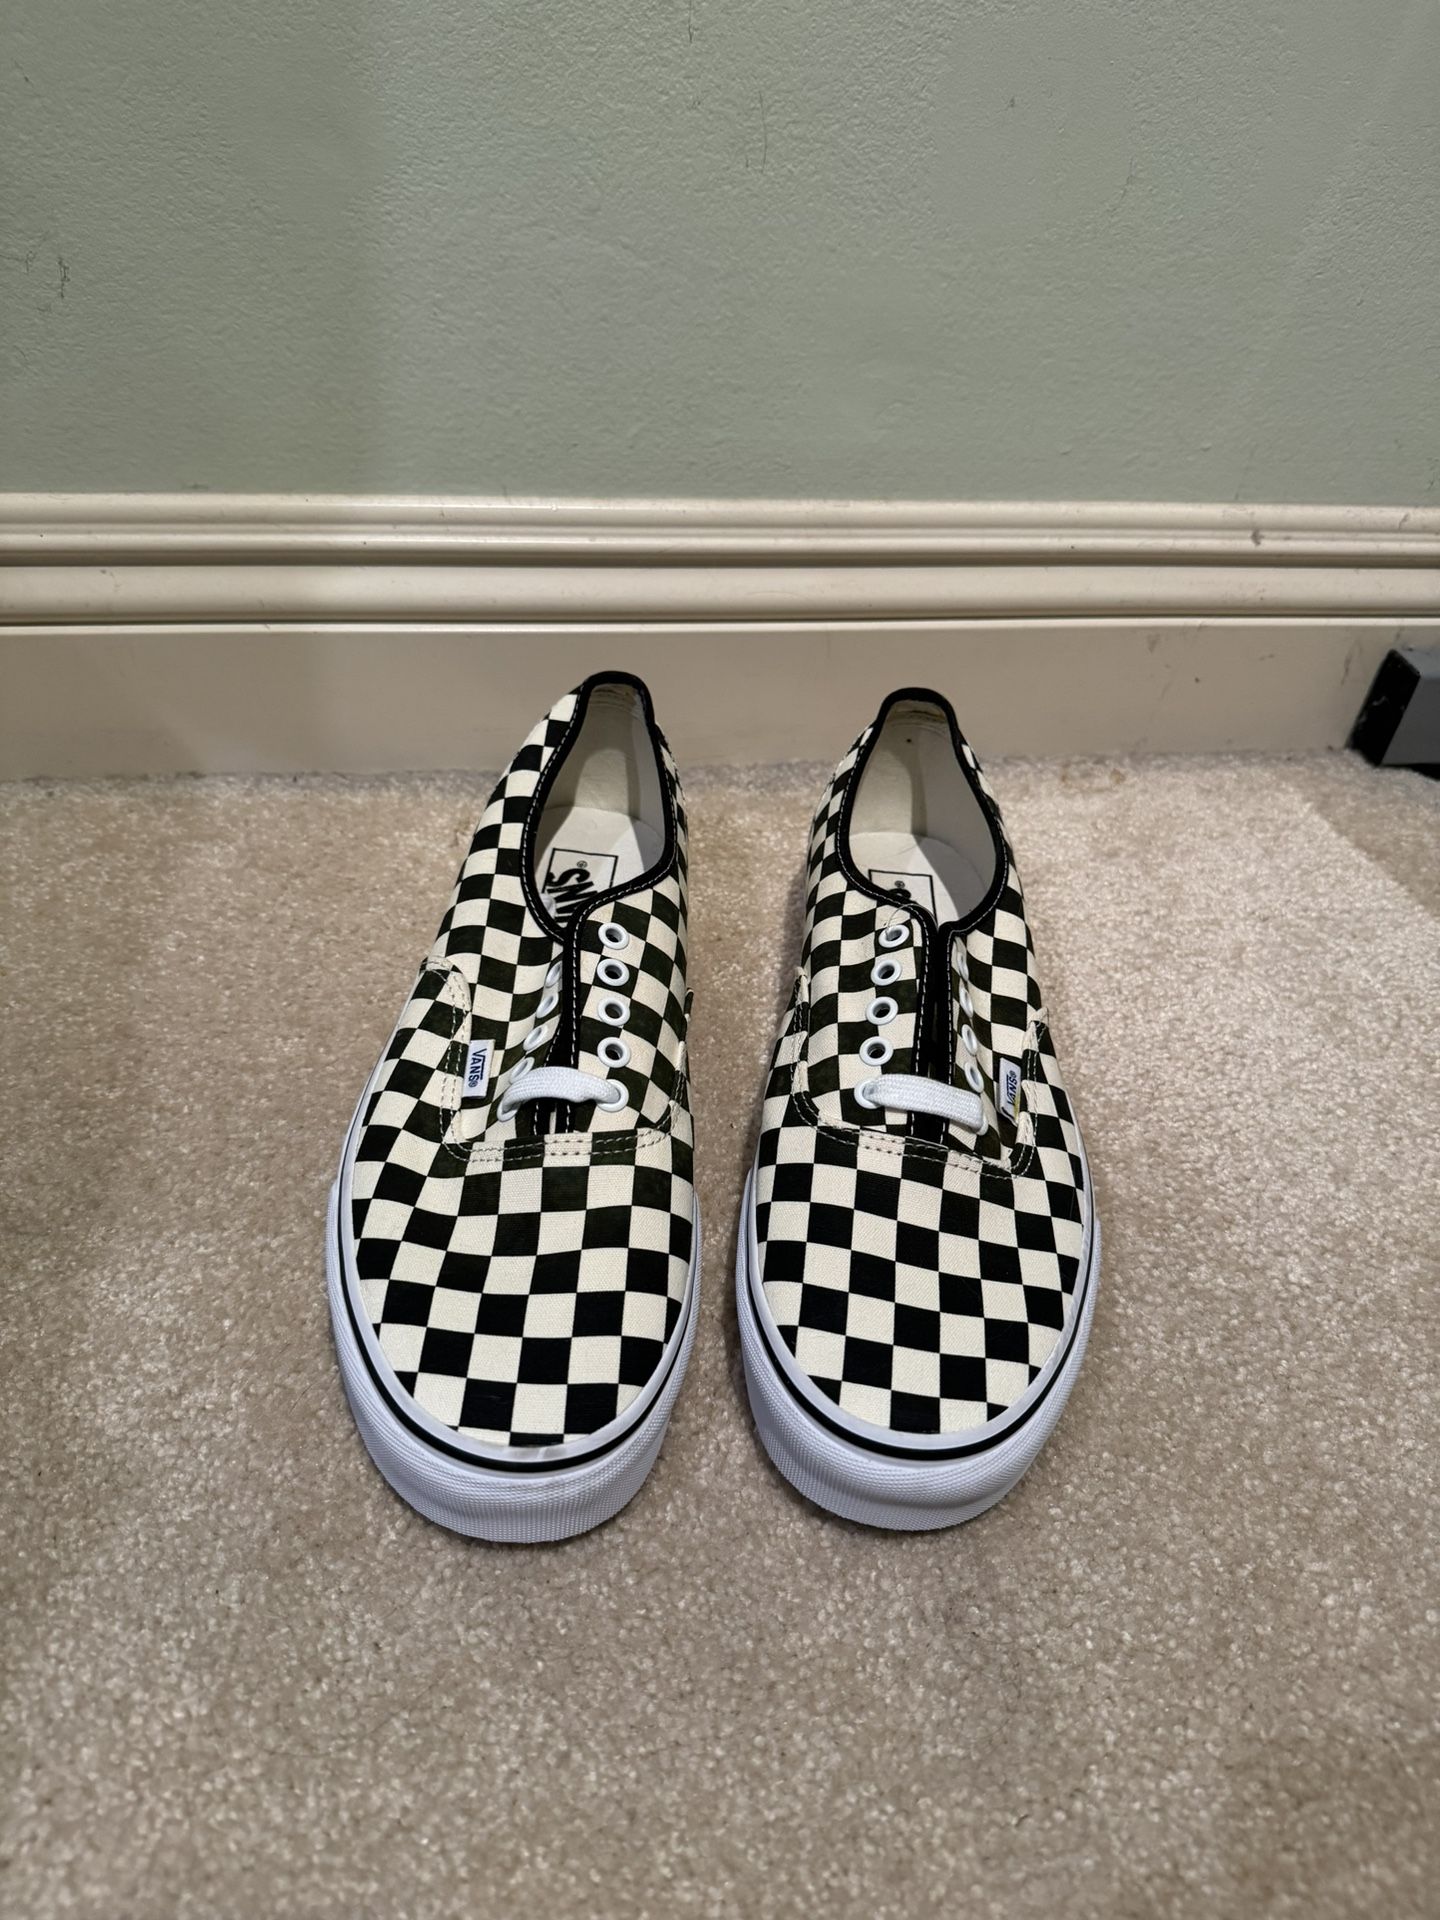 Vans Tan and Black Checkered Shoes